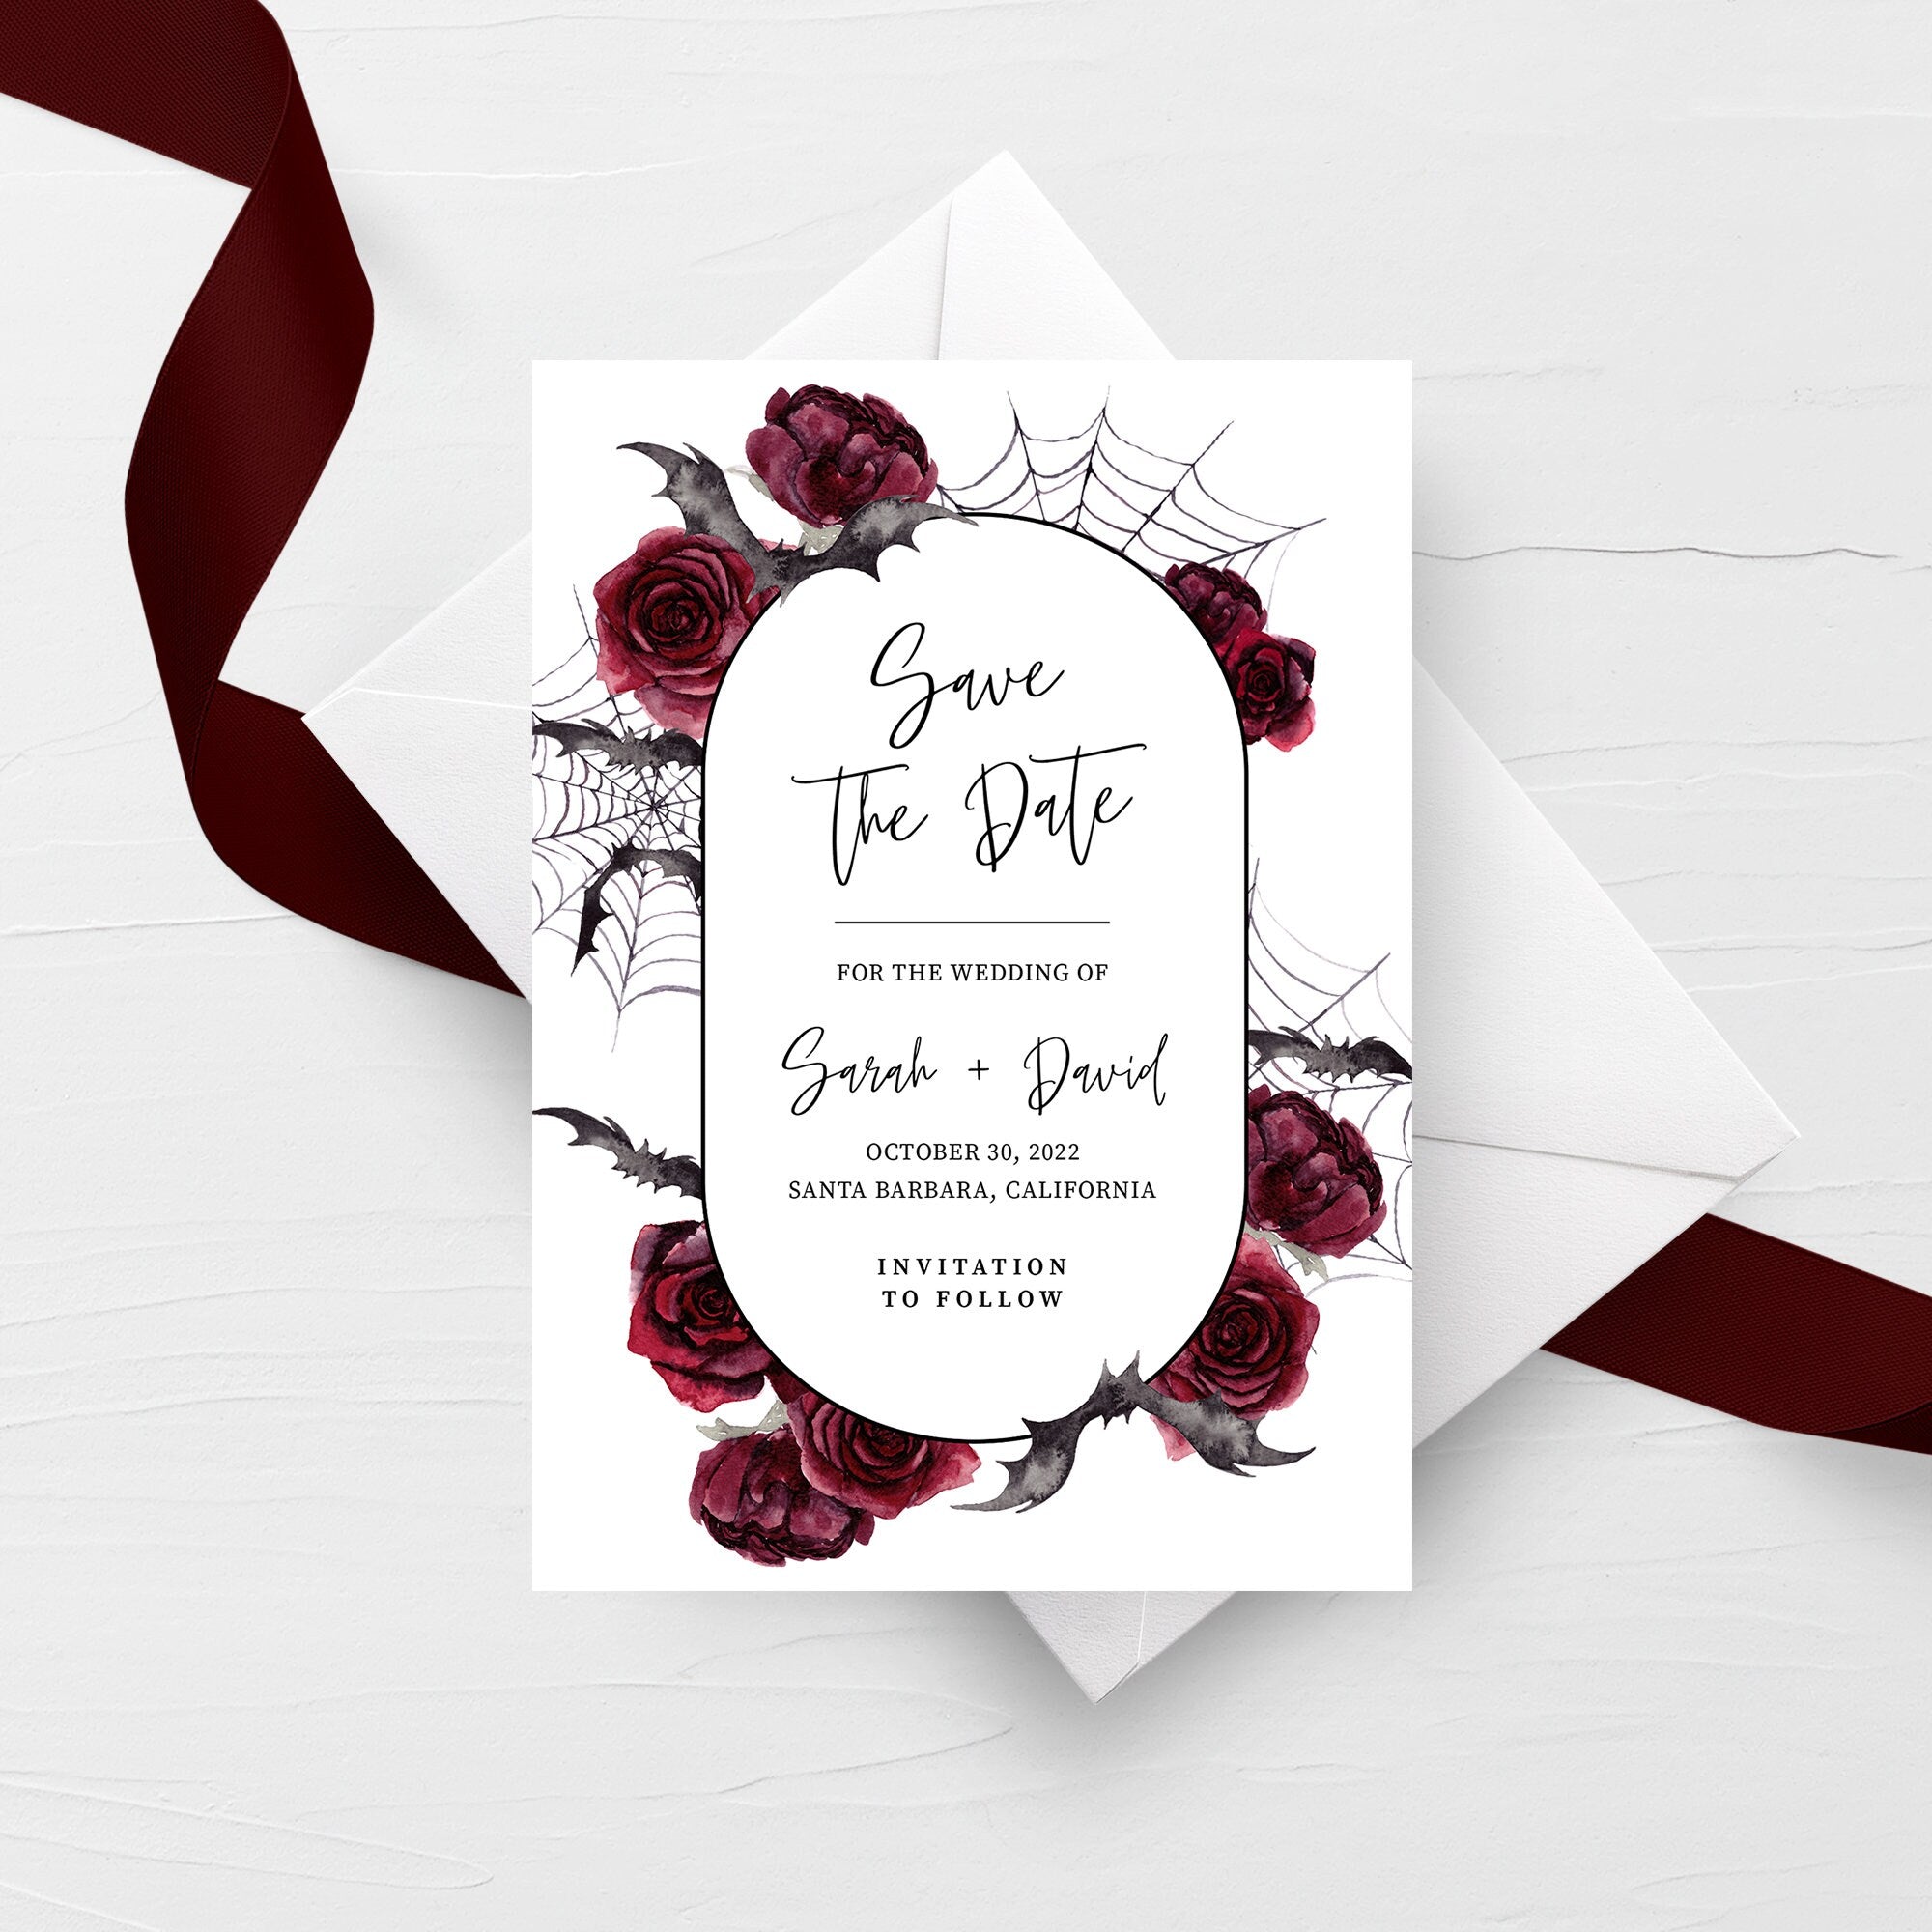 Halloween Save The Date Template, Editable Save The Date Card, Gothic Wedding Save The Date Printable 5x7 INSTANT DOWNLOAD - H100